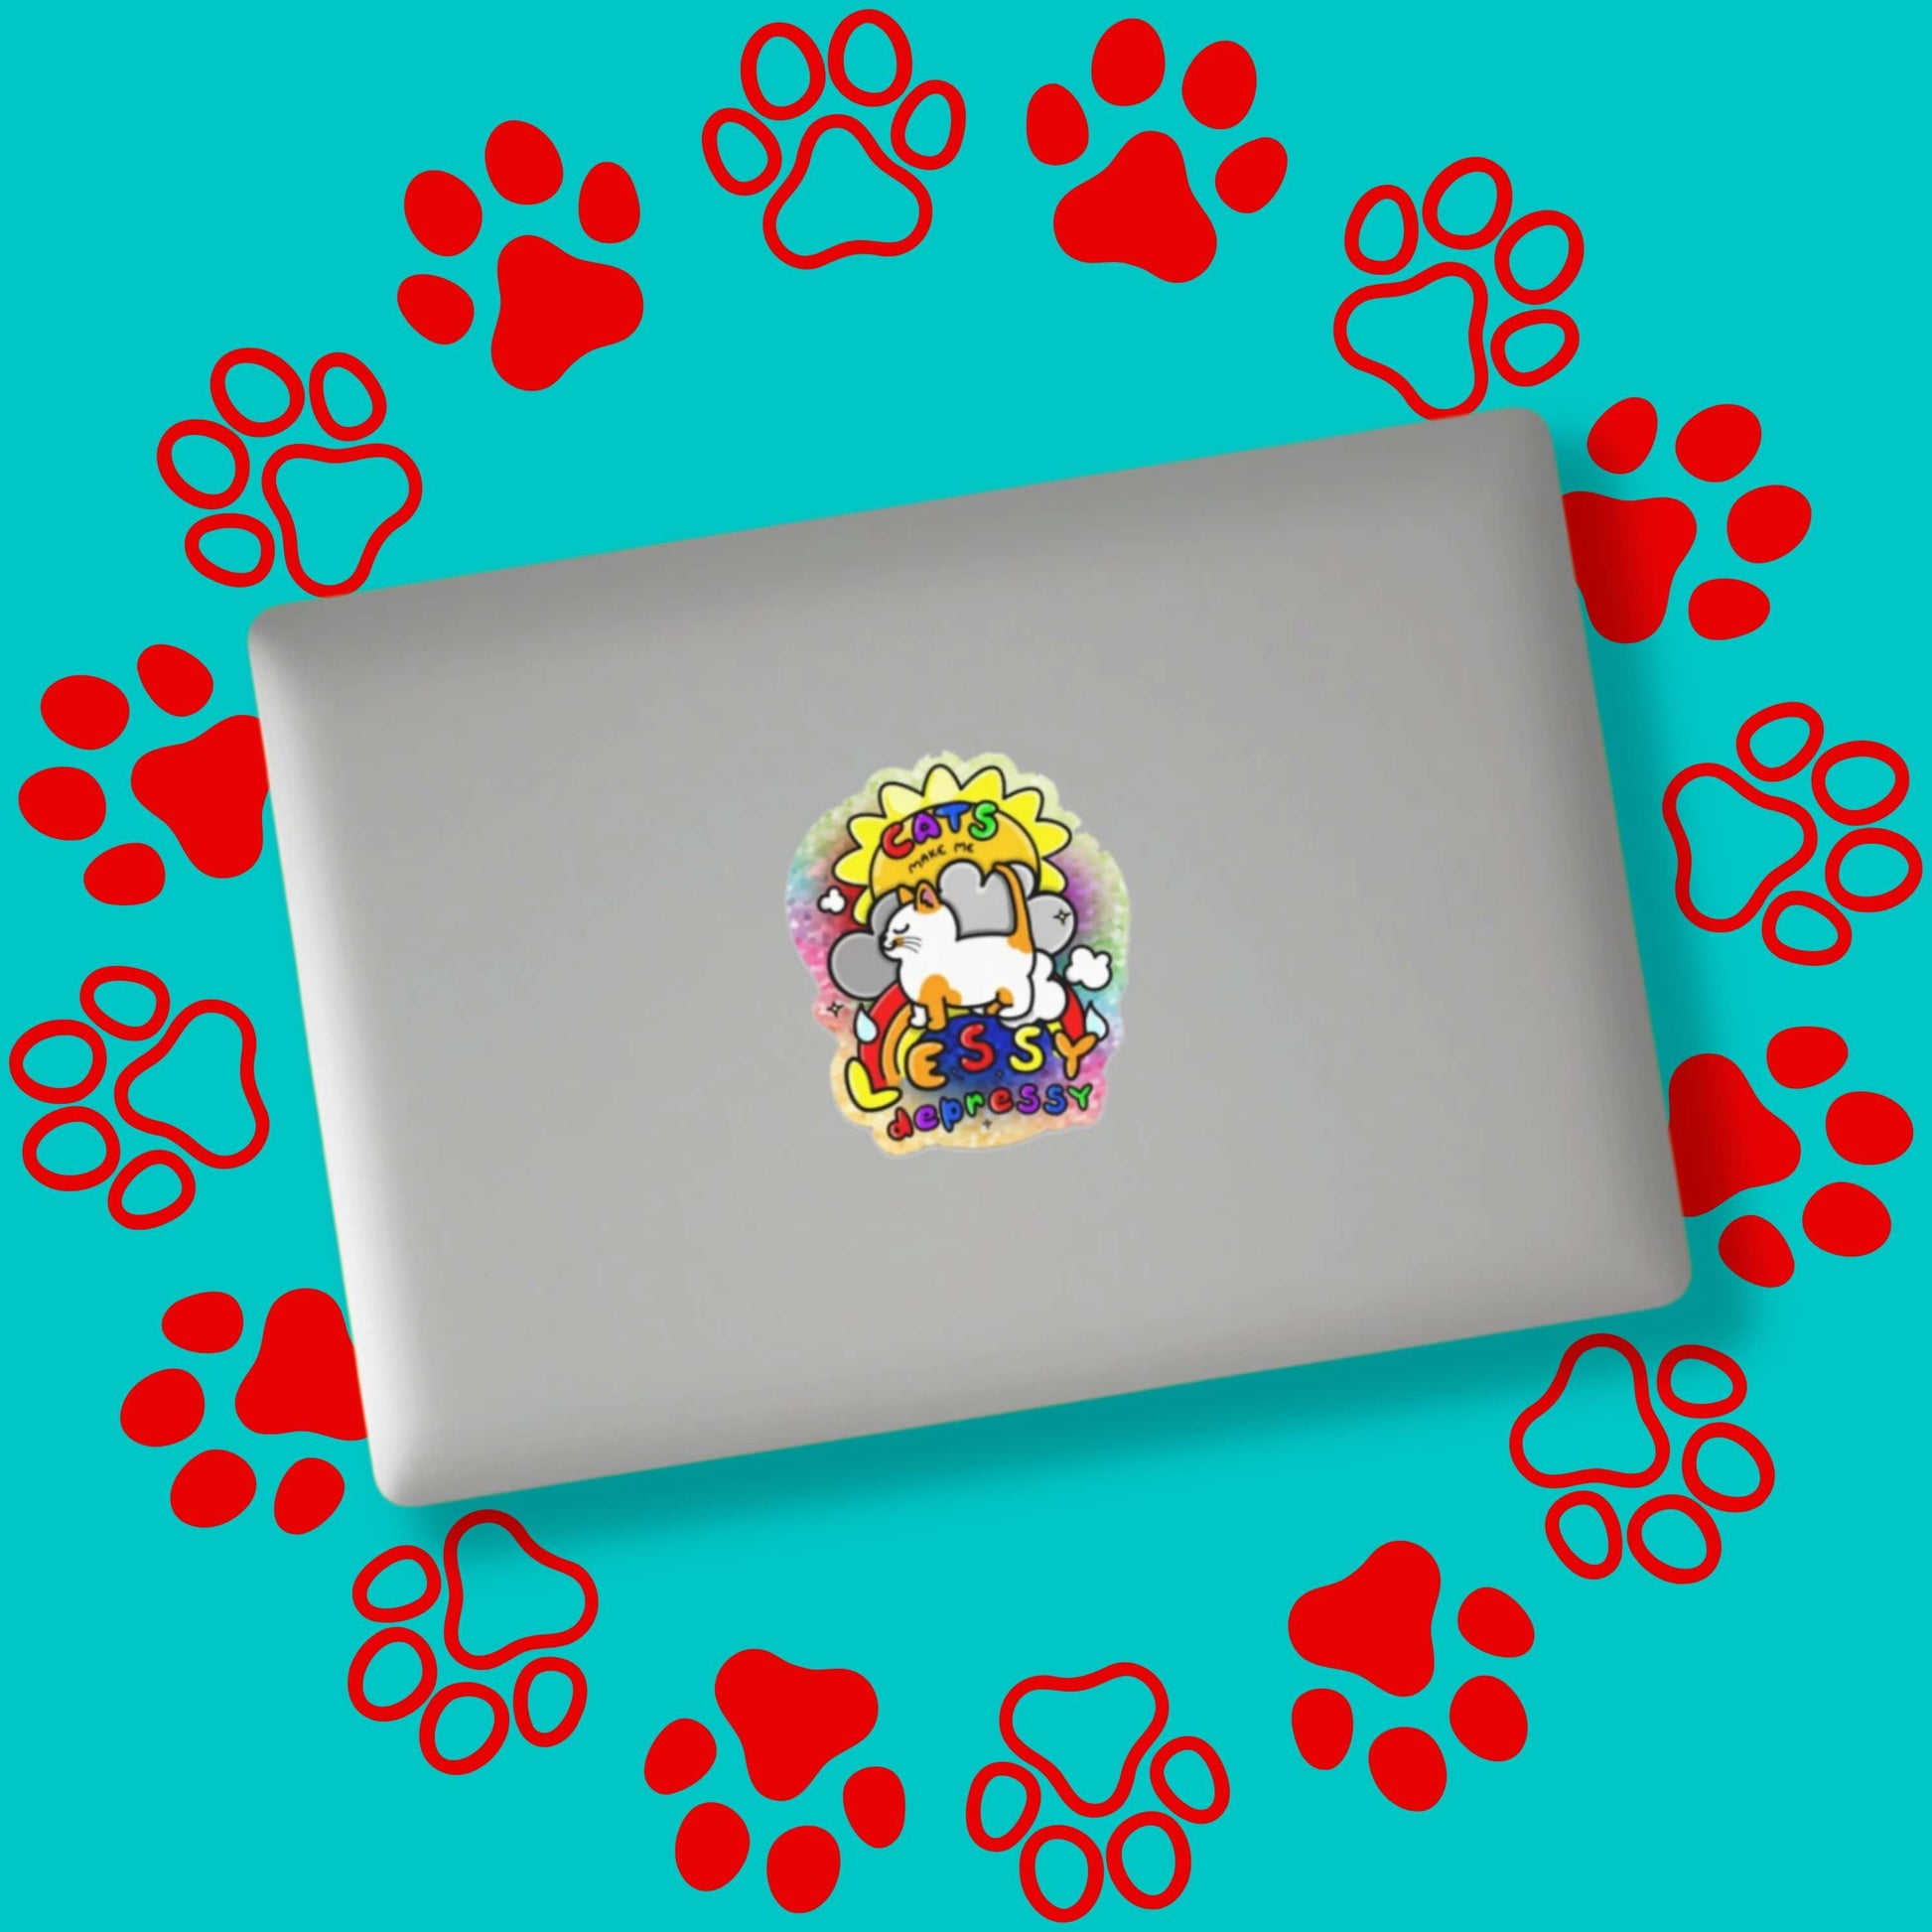 The Cats Make Me Lessy Depressy Holographic Glitter Sticker stuck on a silver laptop on a red and blue paw print background. The holographic glittery sticker is of a smiling orange and white cat with a sunshine, raincloud and rainbow underneath, surrounding is rainbow text reading 'cats make me lessy depressy'. Hand drawn design raising awareness for mental health.